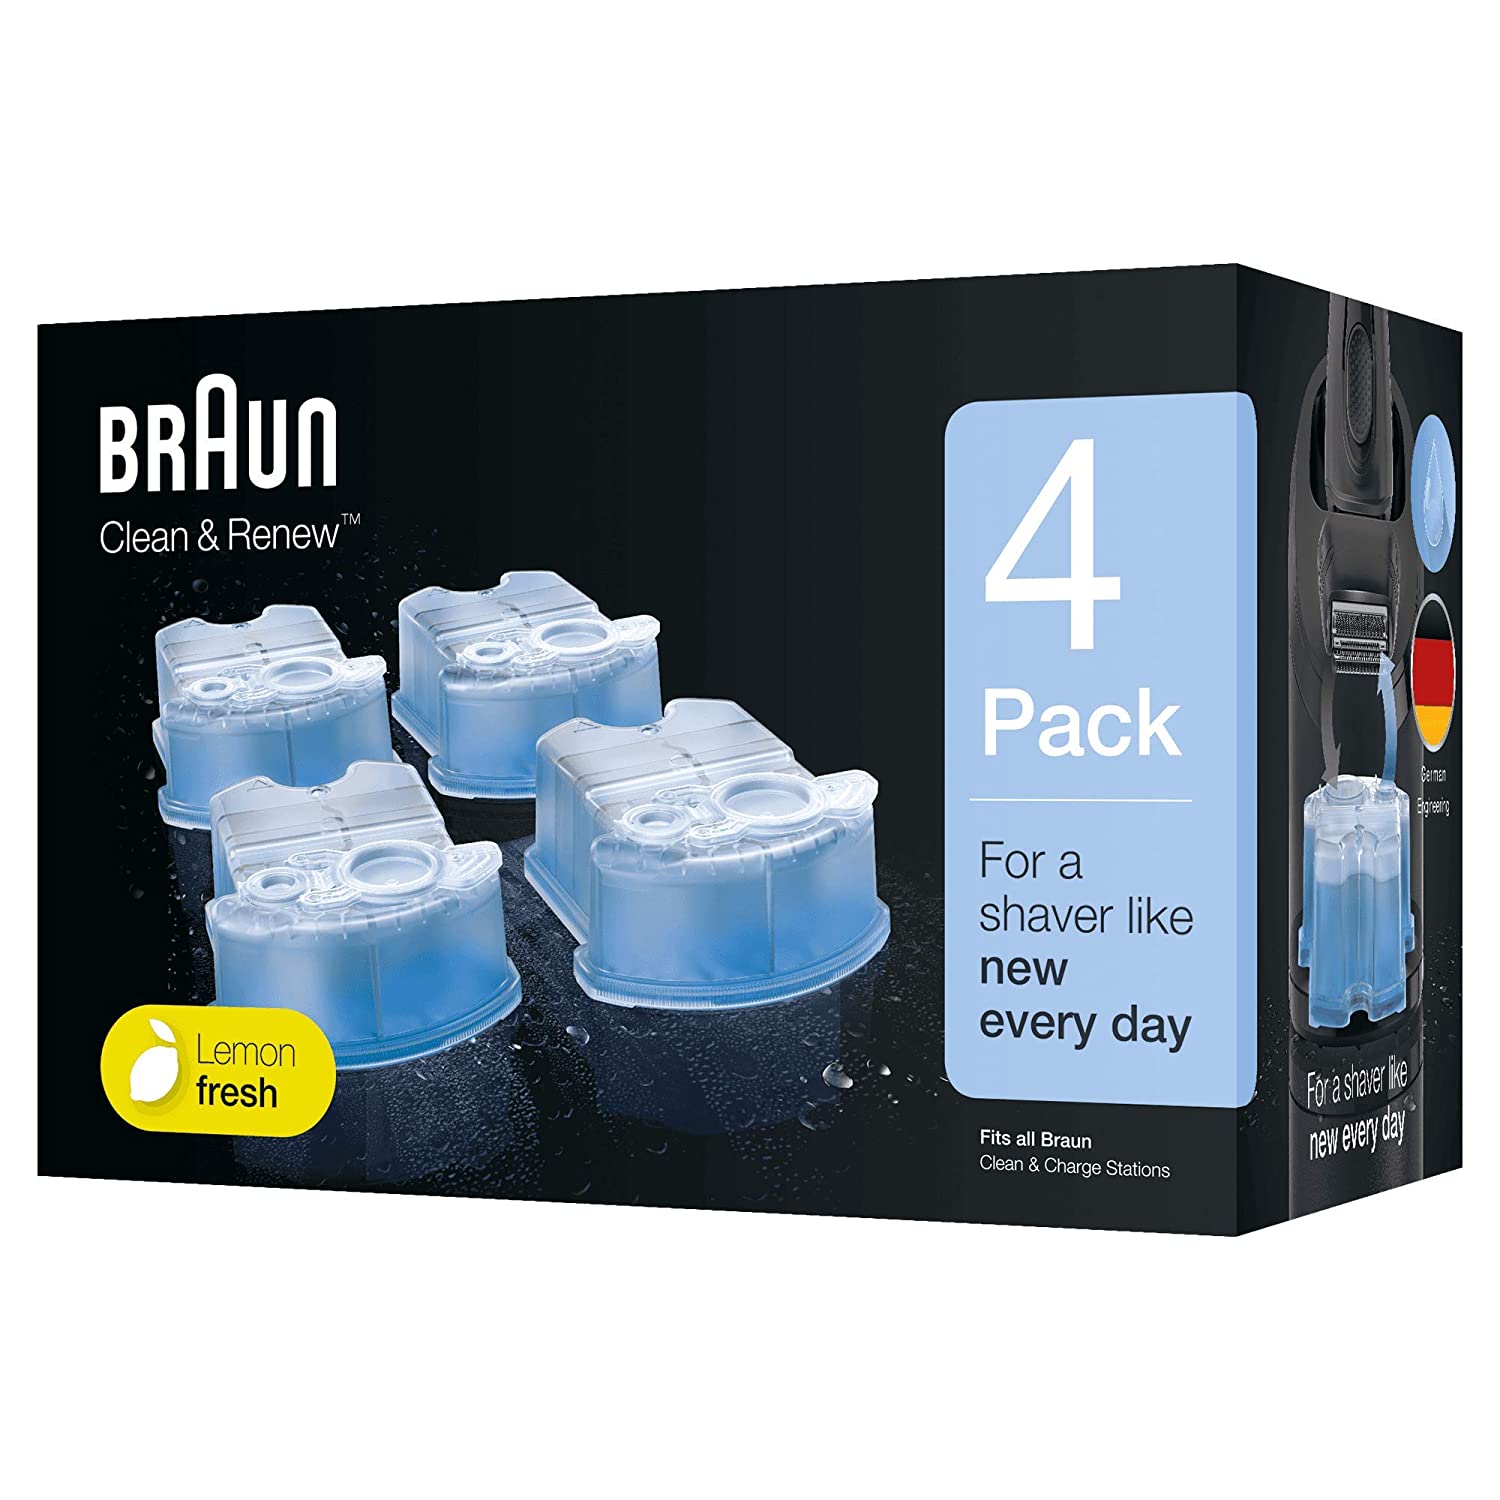 Braun Clean and Renew 4 Pack, Cartridge, Refill, Replacement Cleaner, Cleaning Solution - 22.8 Fl.Oz (680ml)